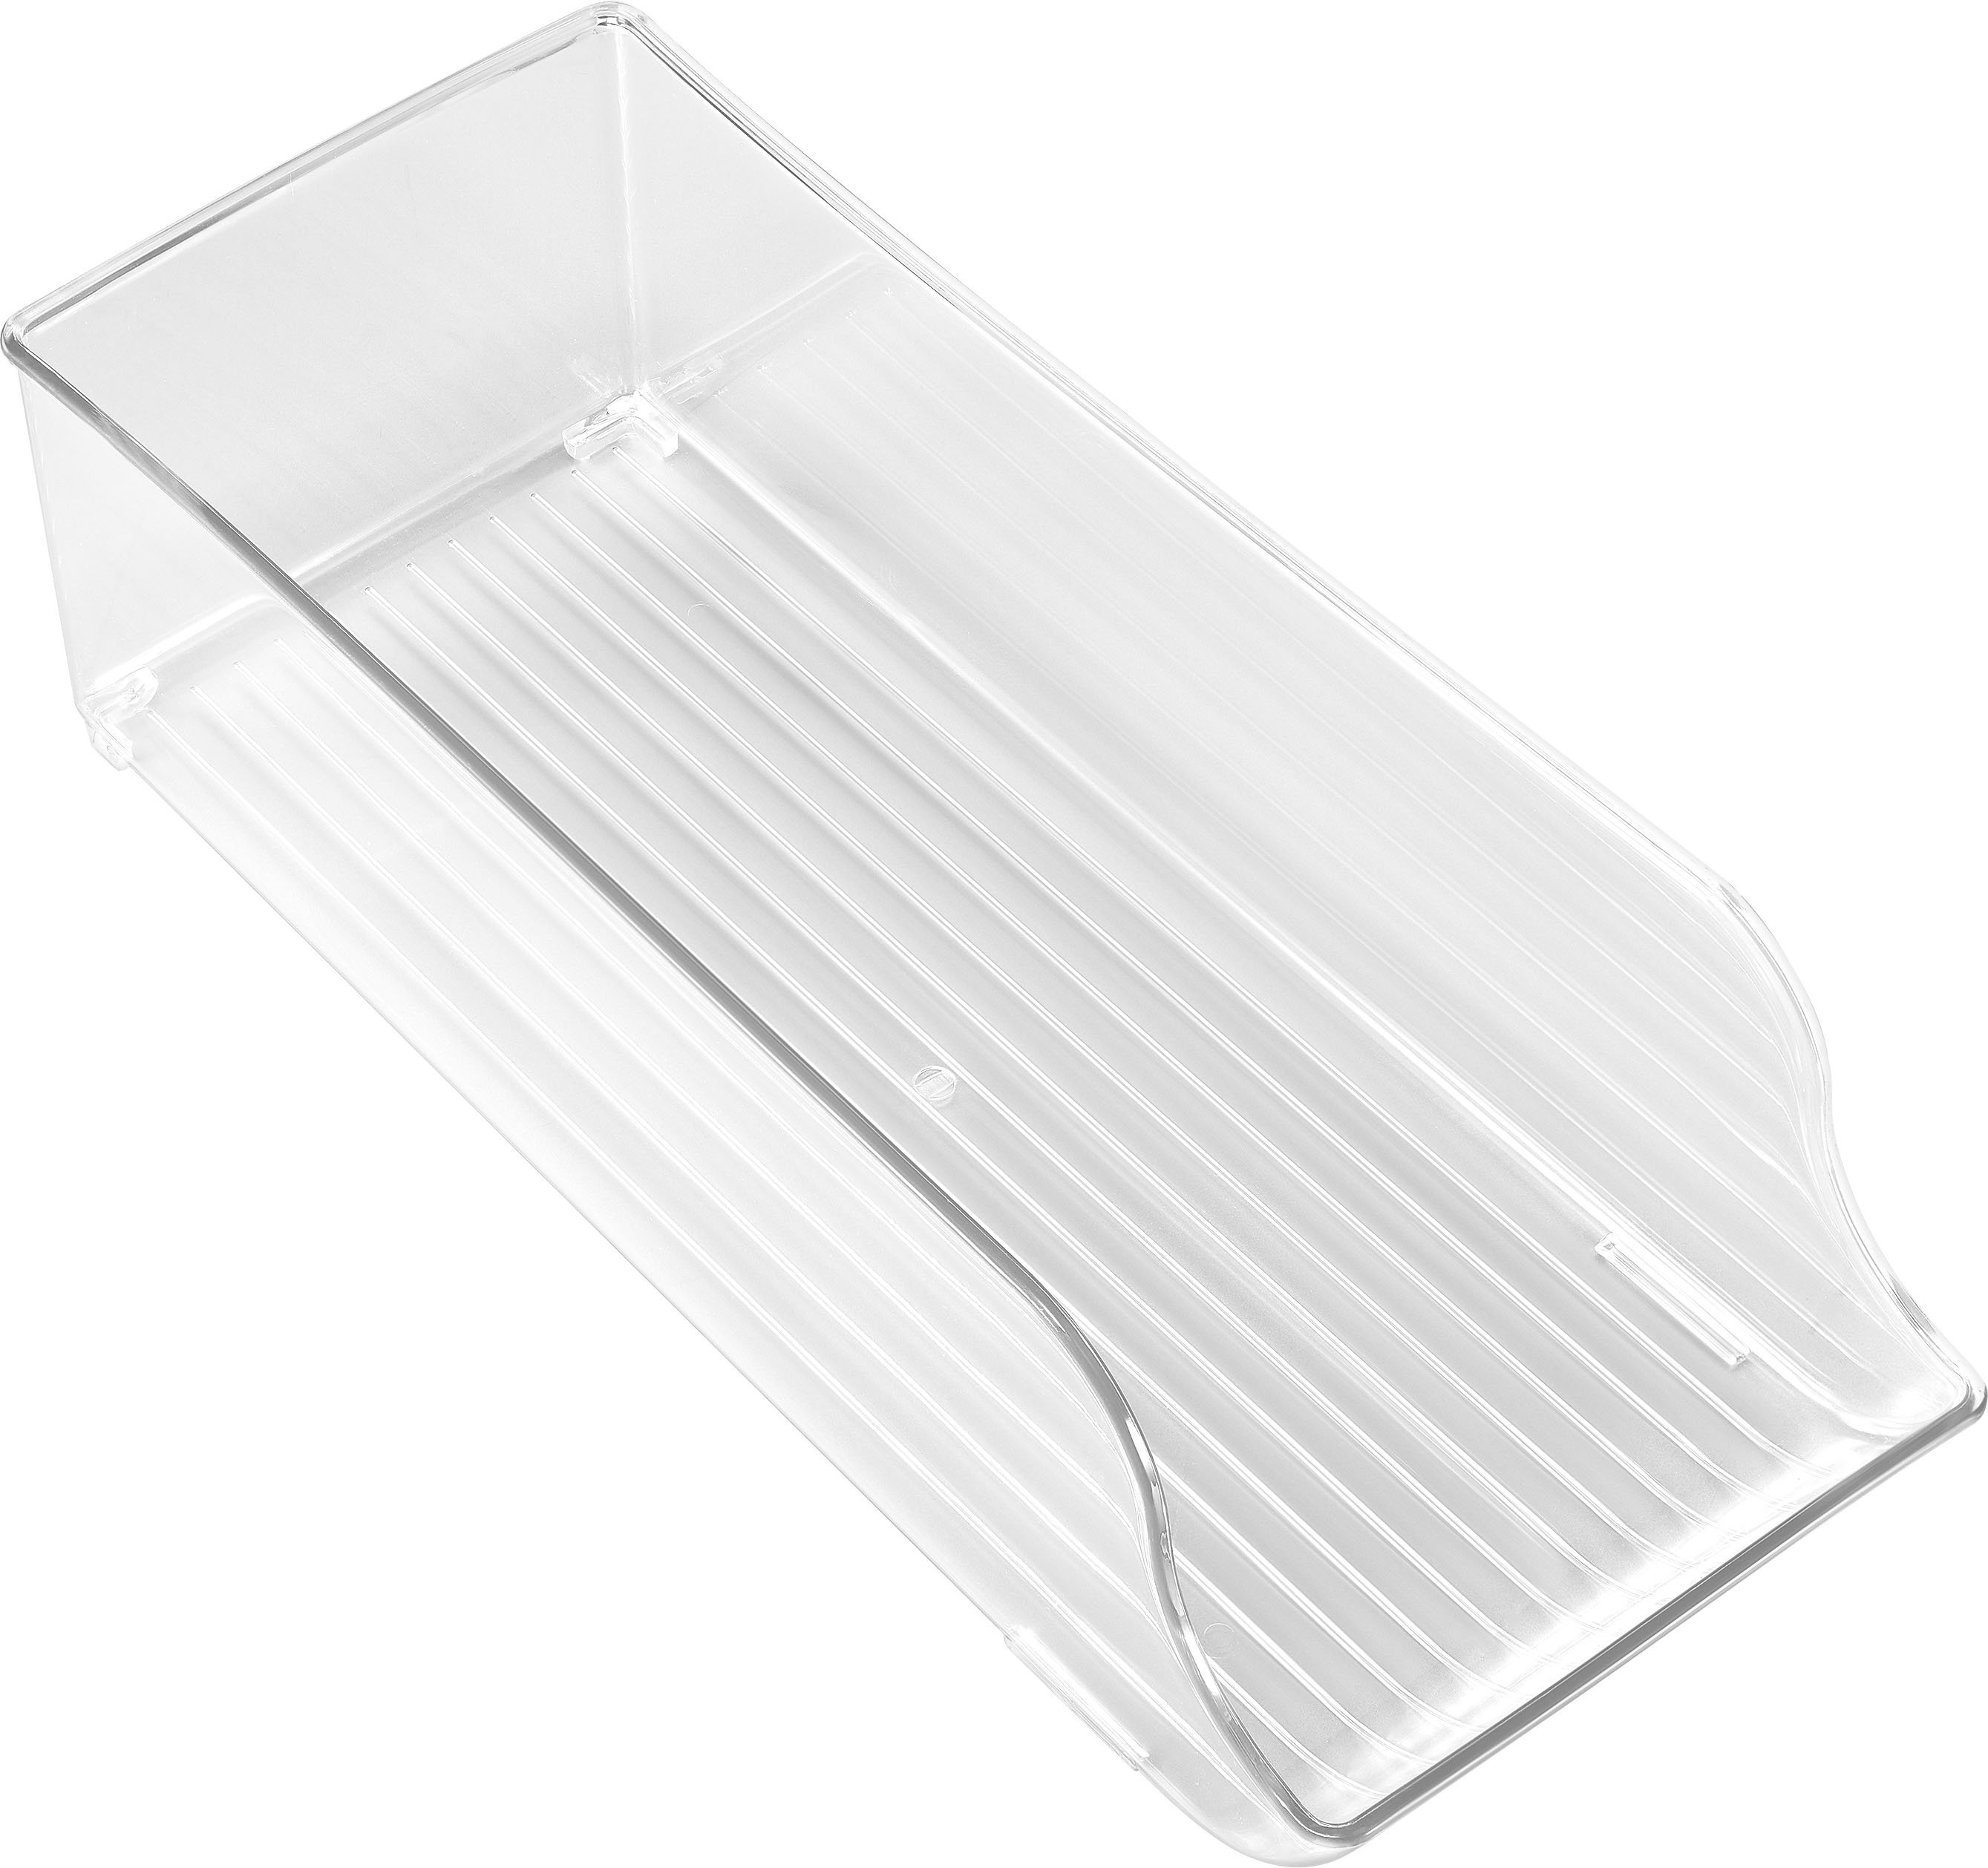 Angle View: Best Buy essentials™ - Universal Refrigerator Storage Bin for Soda Cans - Clear